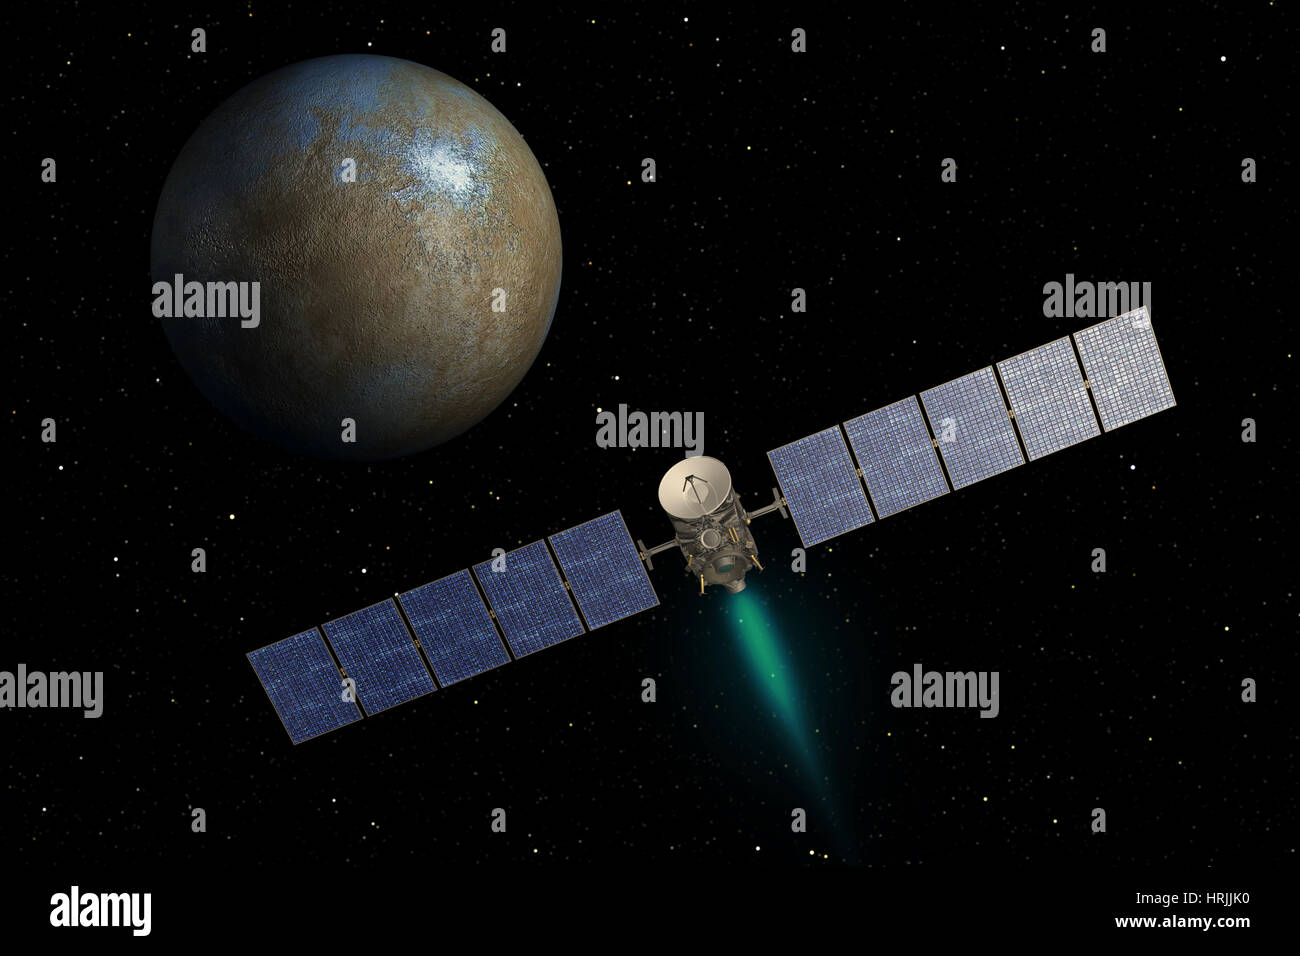 Dawn Spacecraft and Dwarf Planet, Ceres Stock Photo